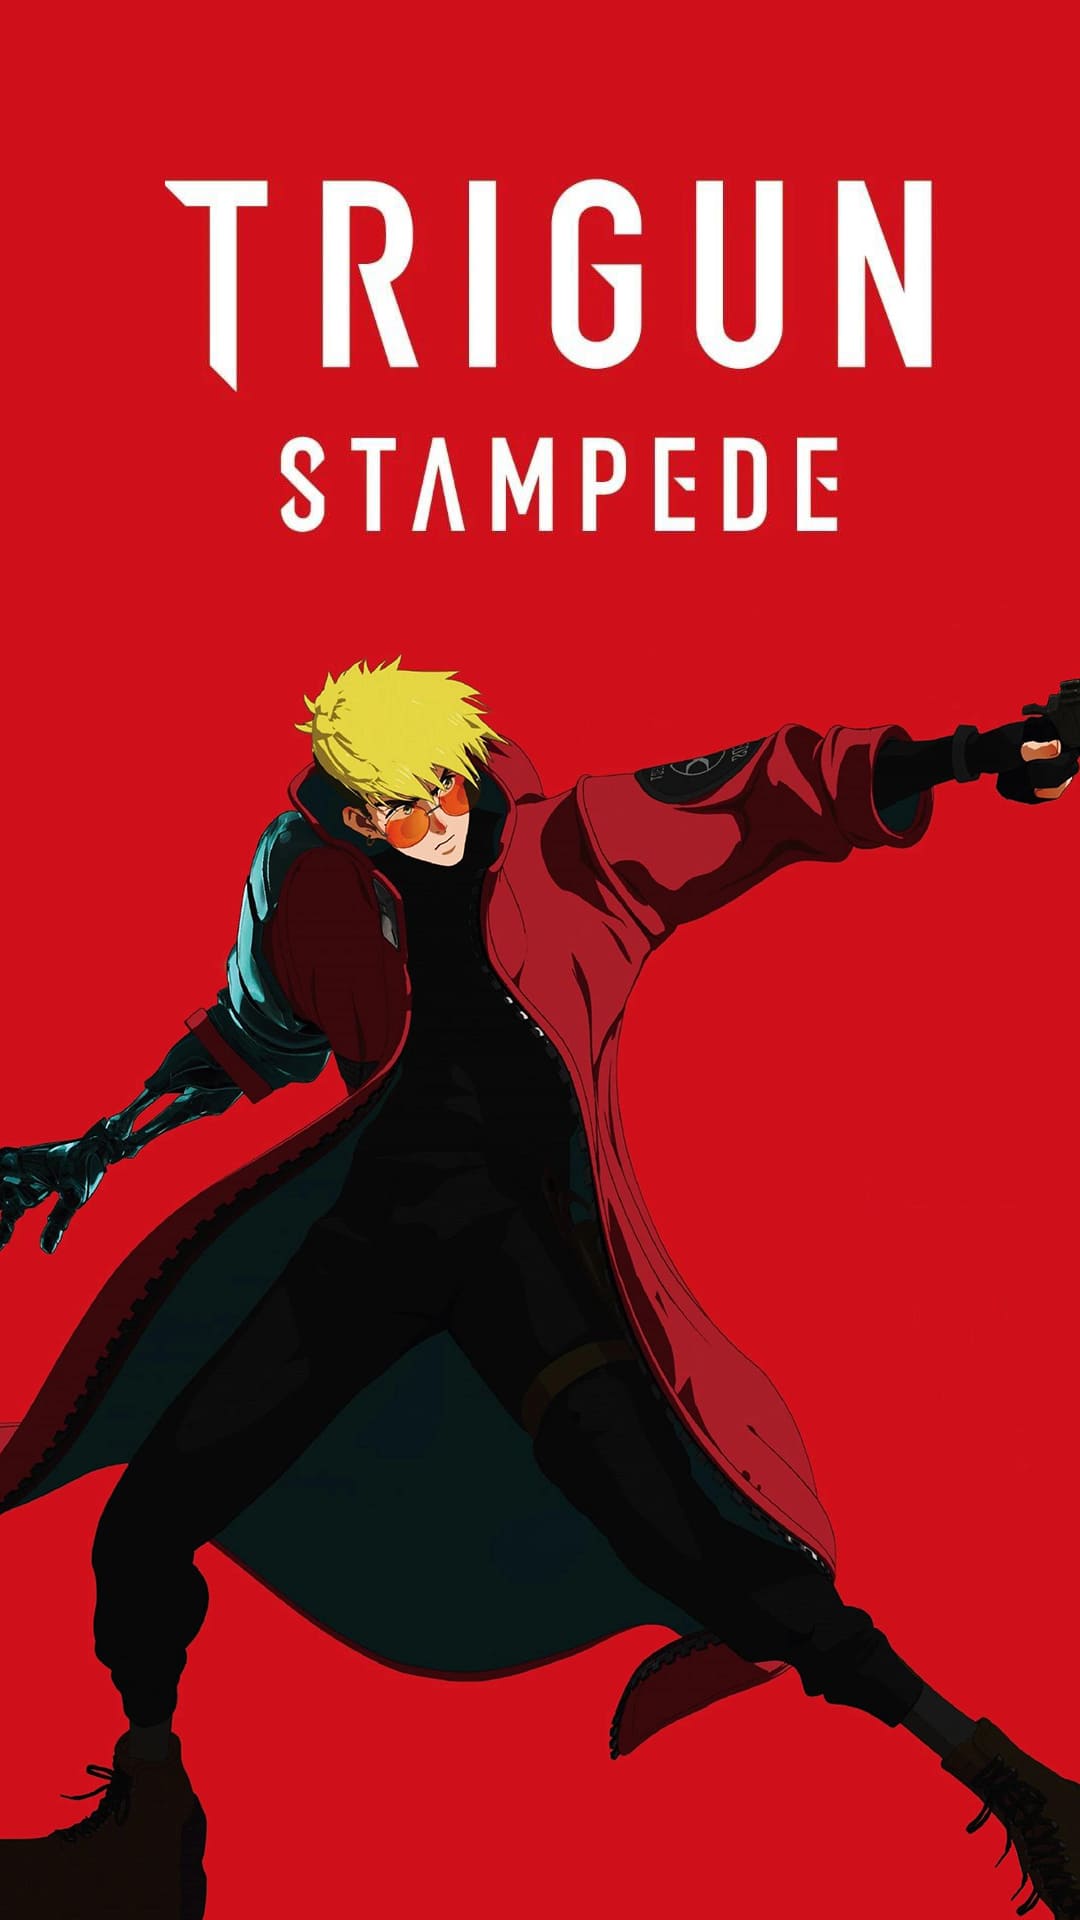 Vash the Stampede Wallpapers